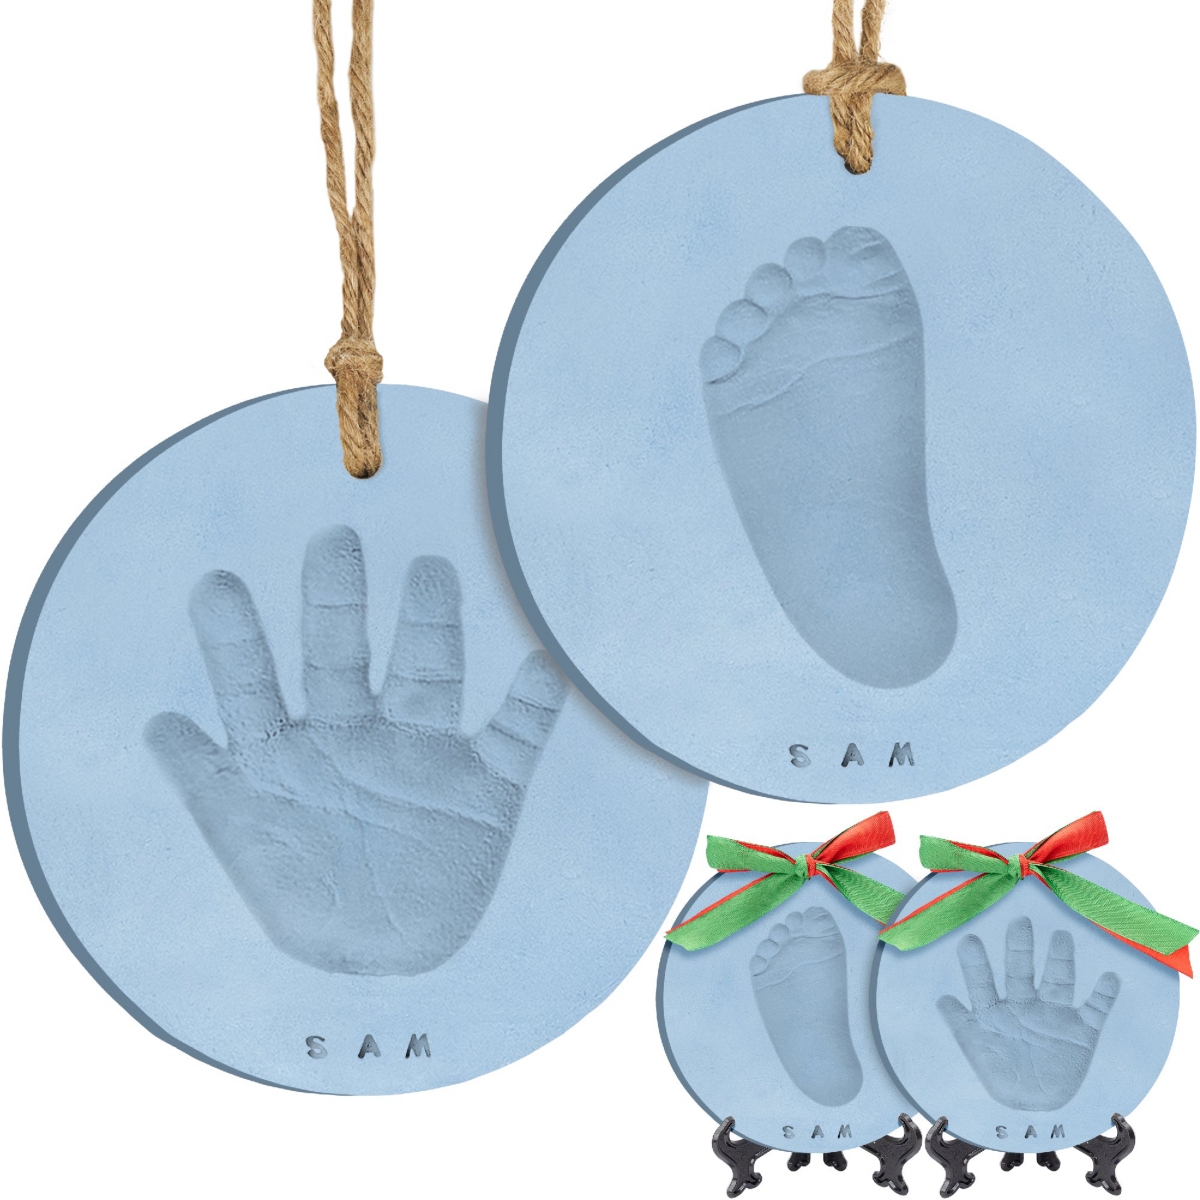 Keababies 2pk Baby Hand And Footprint Ornament Kit, Personalized All-in-1 Baby Foot Print Kit For Newborn, Col In Blue